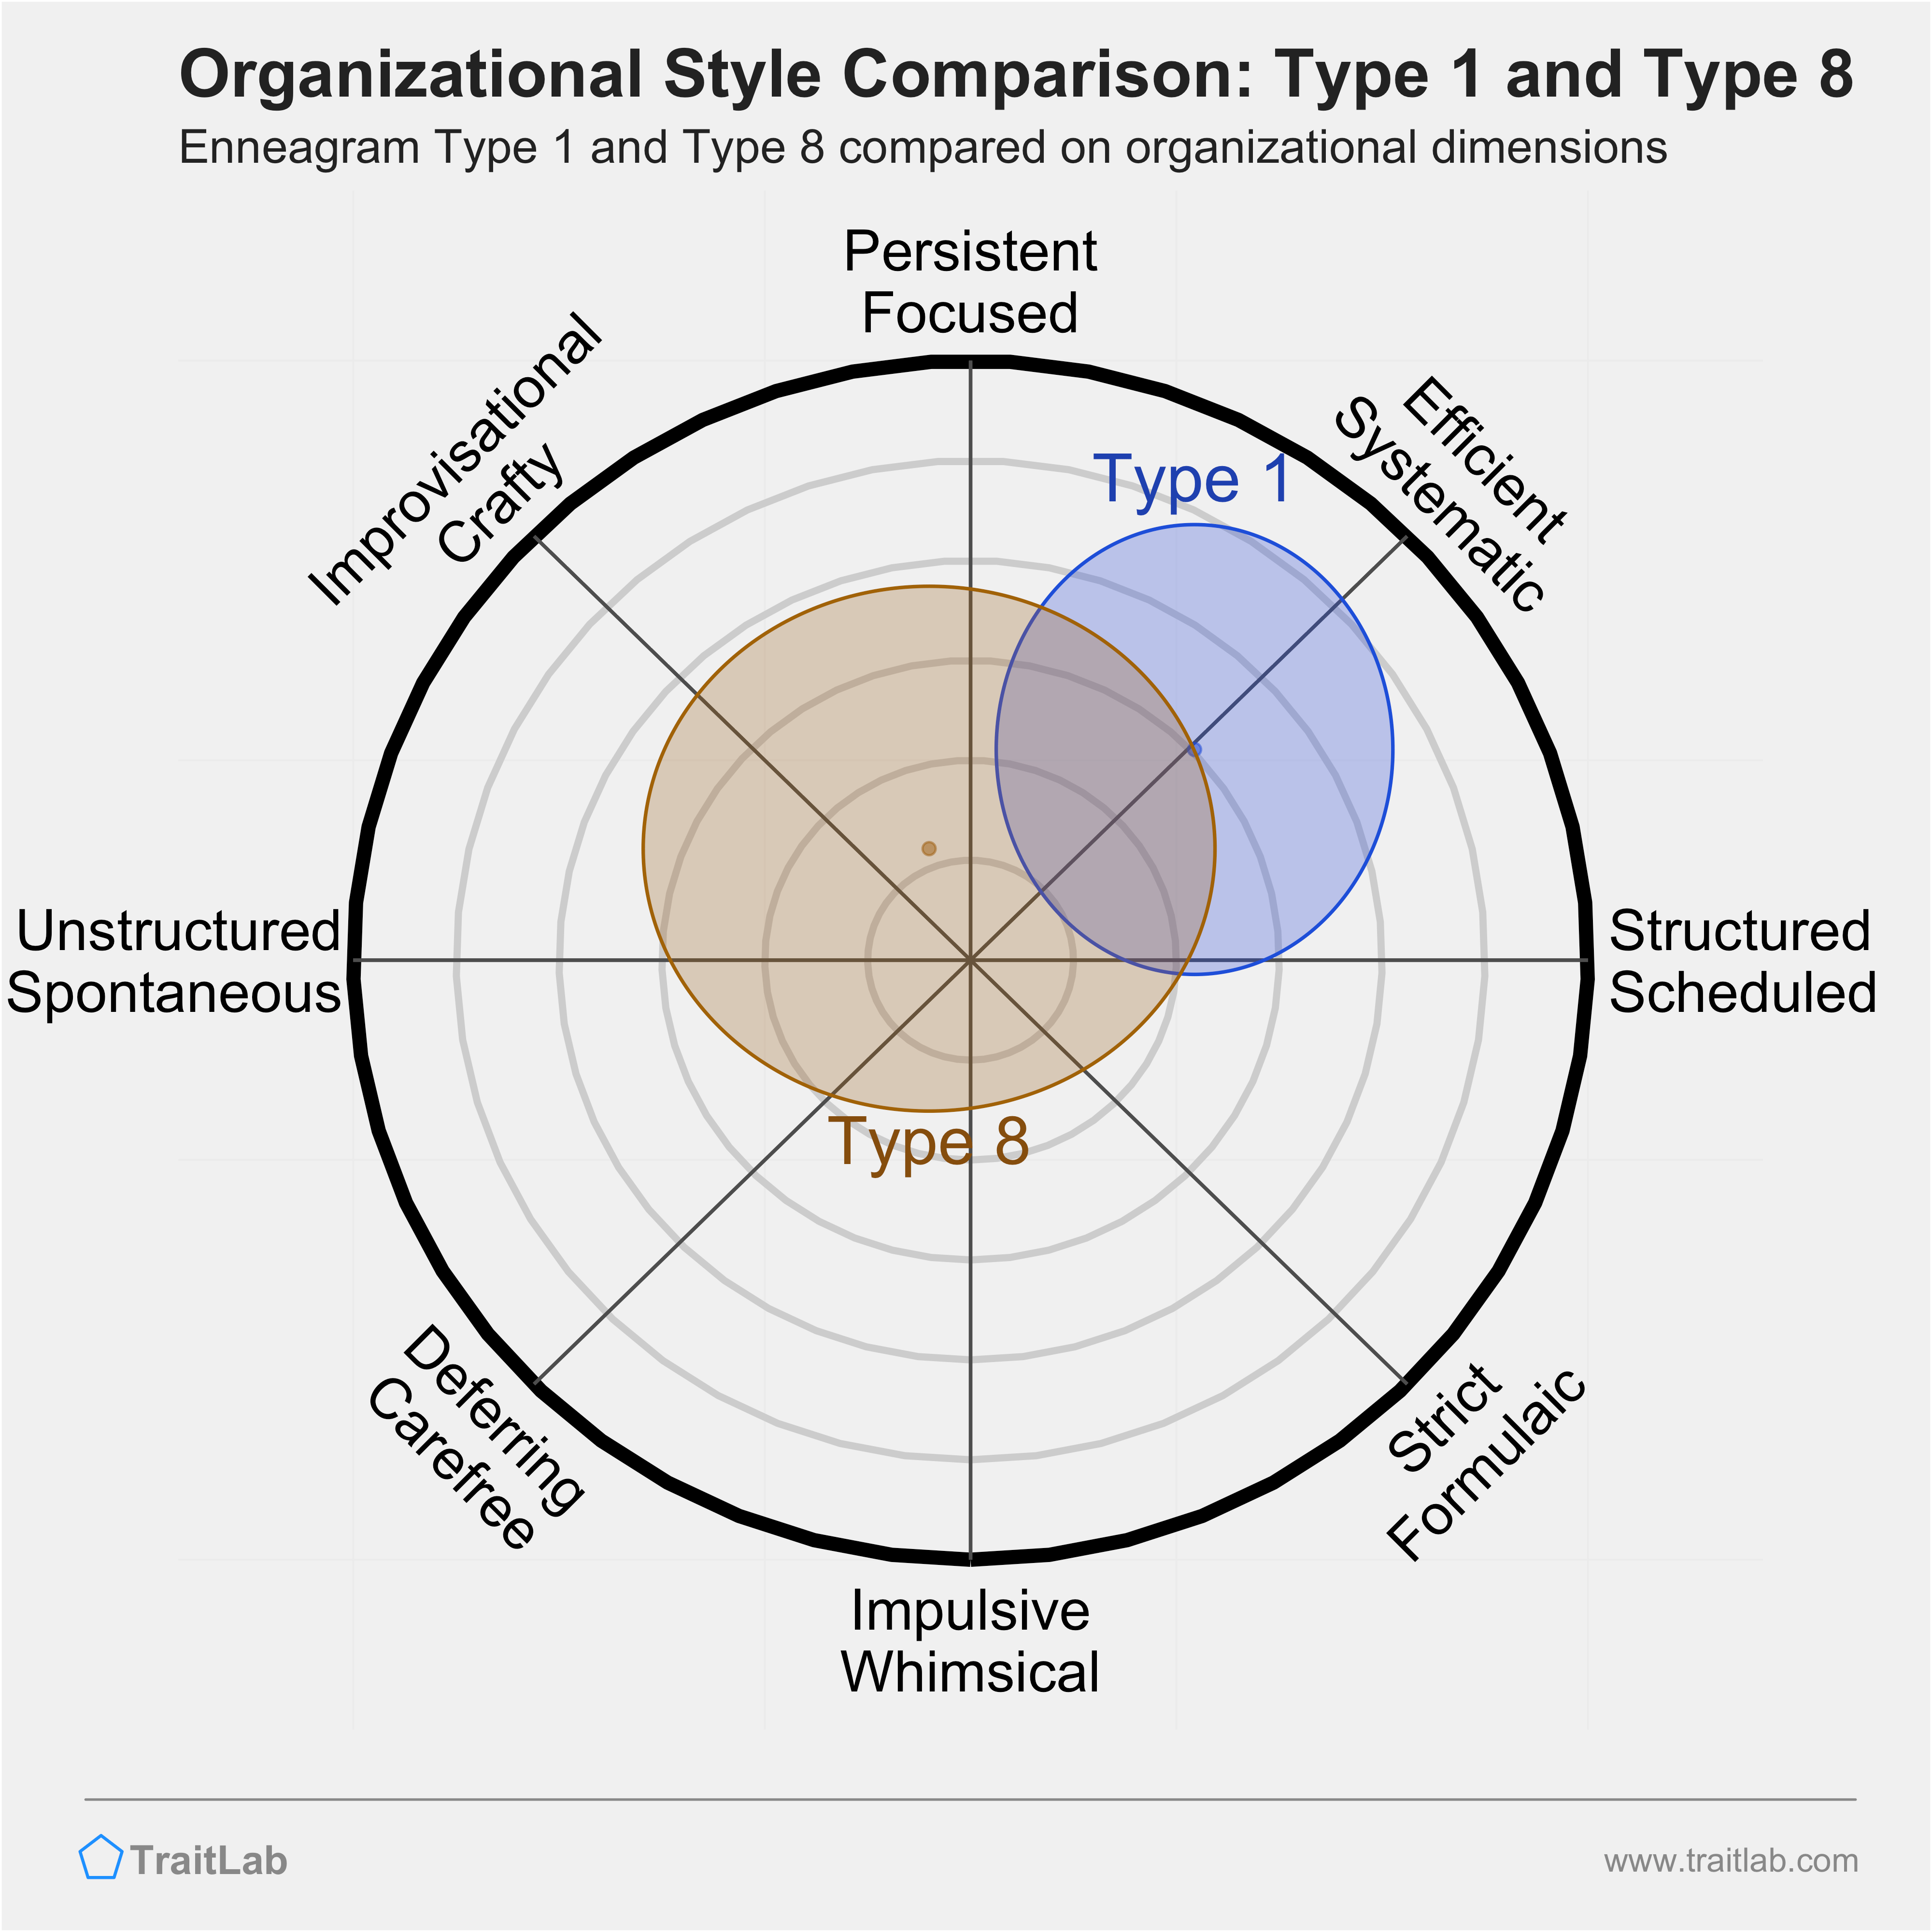 Type 1 and Type 8 comparison across organizational dimensions